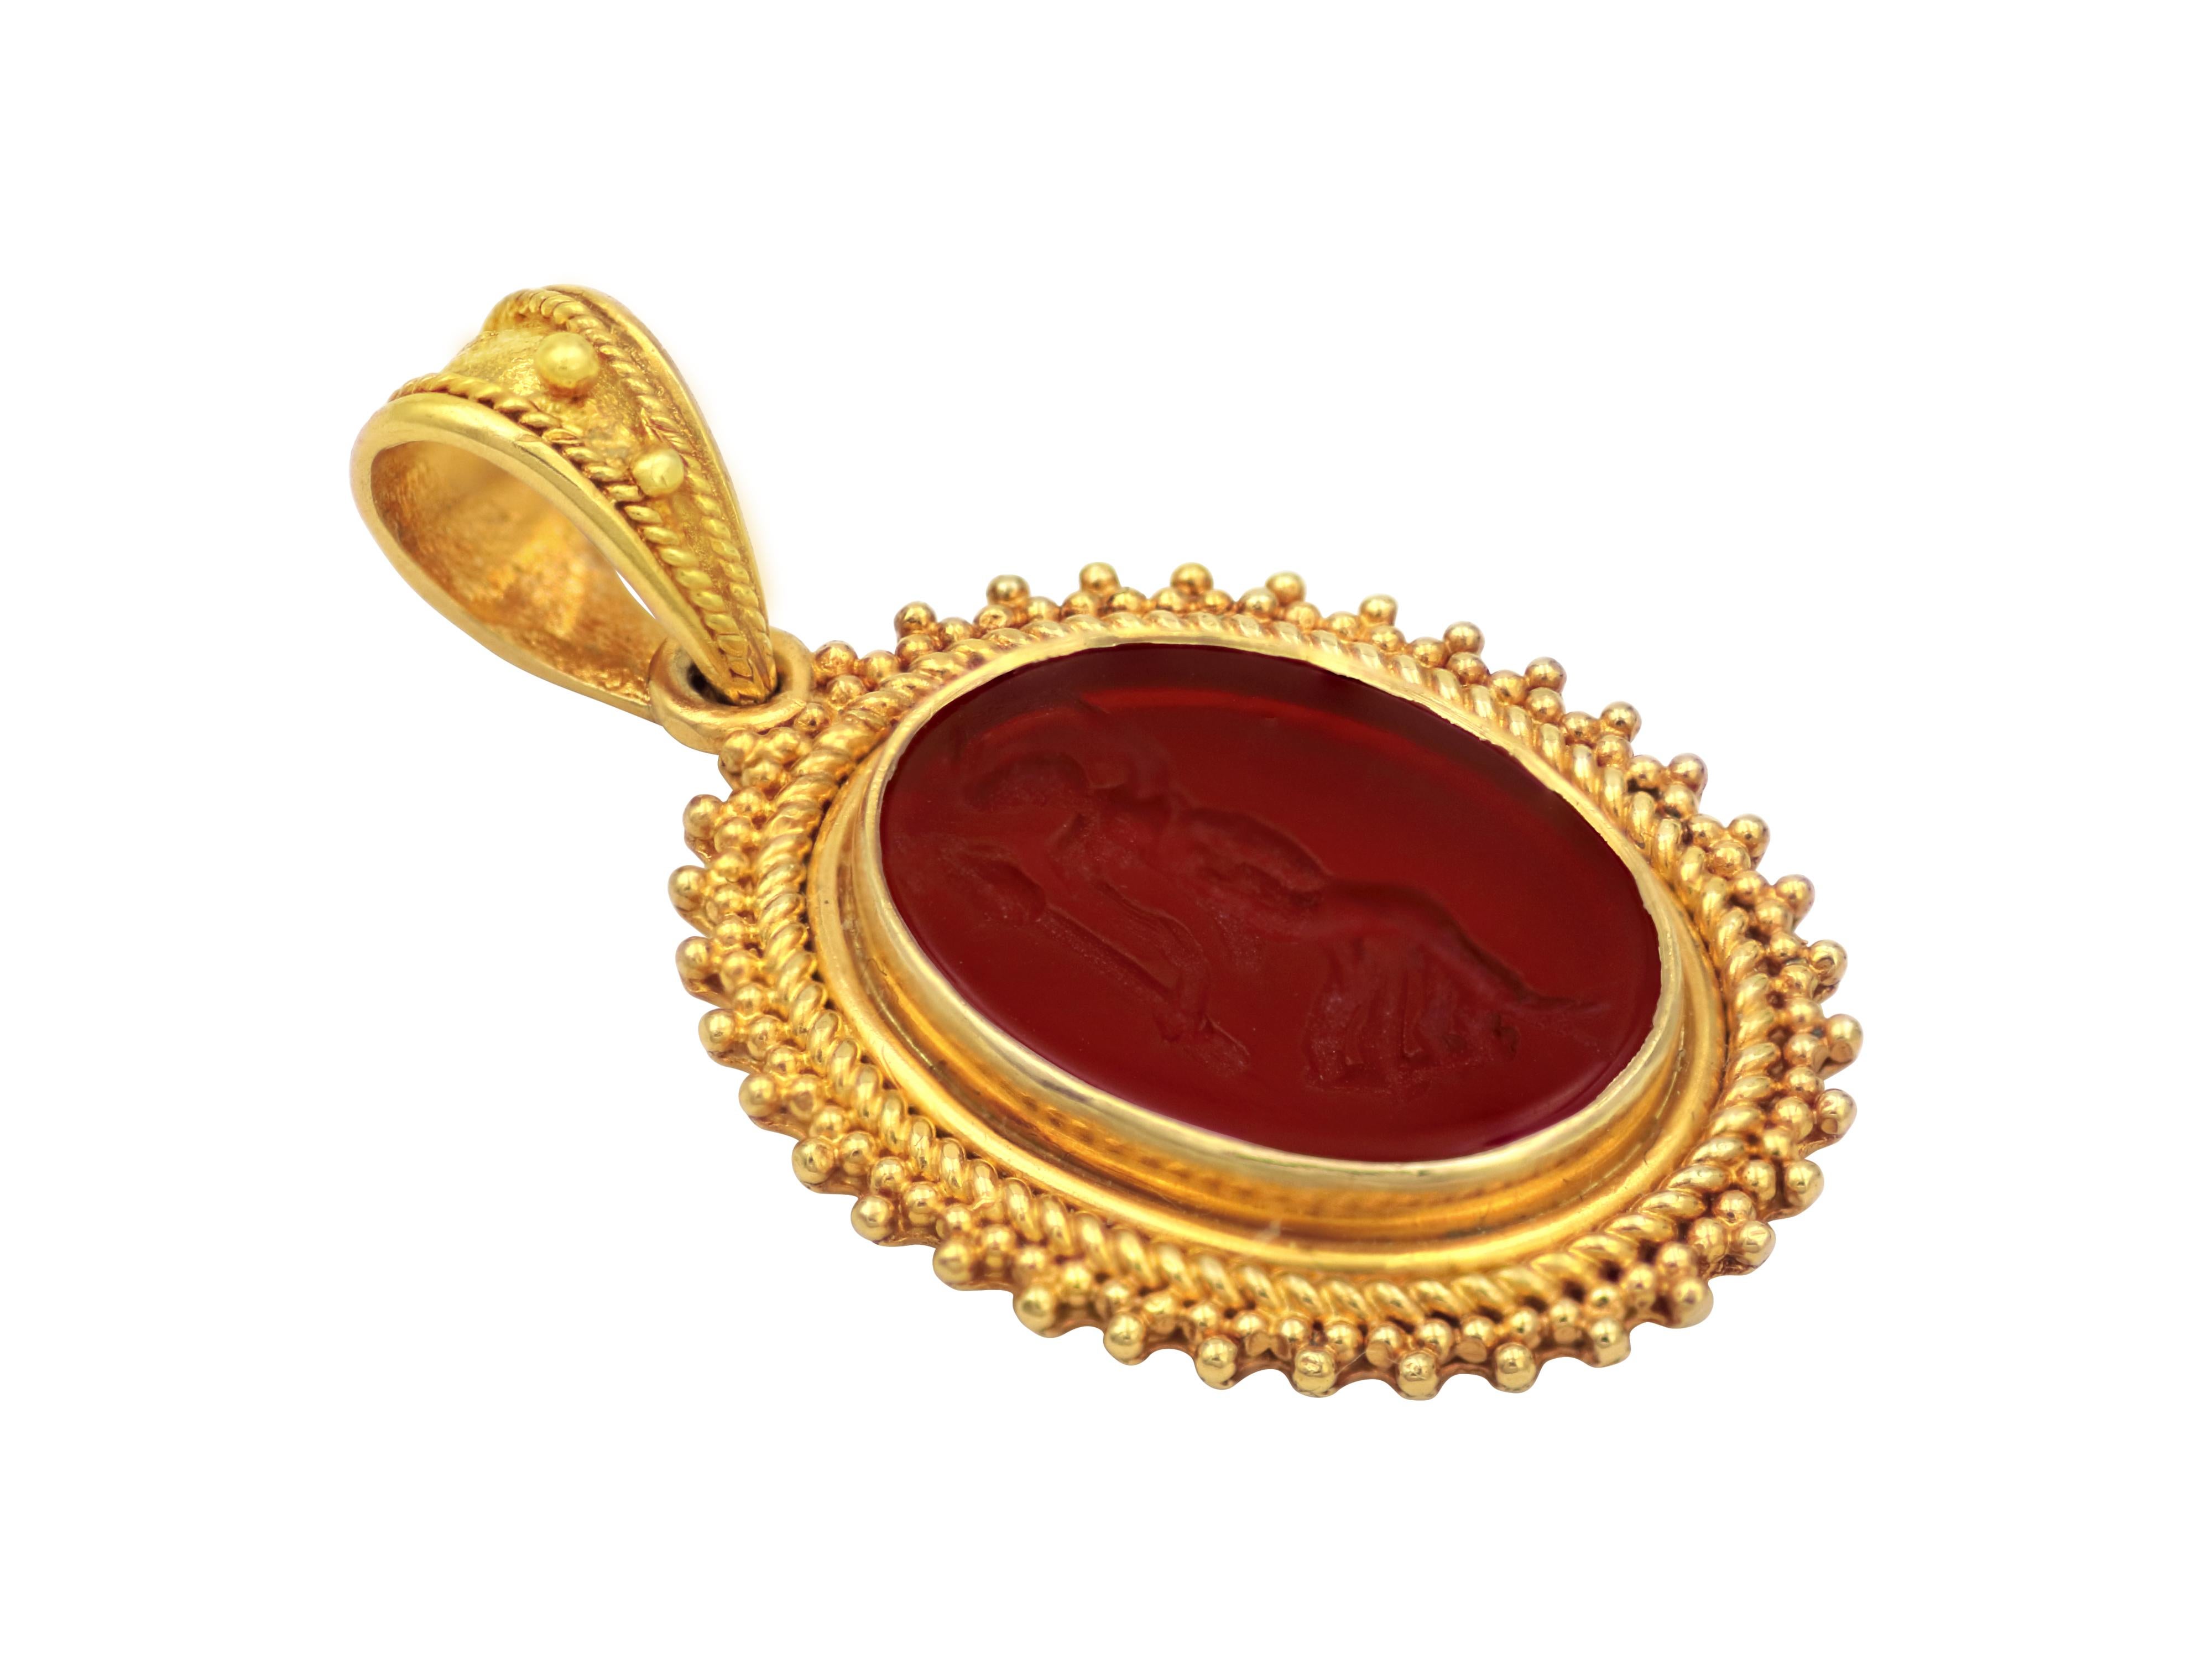 Cornelian pendant carved with goddess Nike. The winged goddess of victory. Check out the incredible detail of filigrees and granulation creating a depth in a 3-D look on this one-of-a-kind pendant. The stone is set with the gold and the bezel is